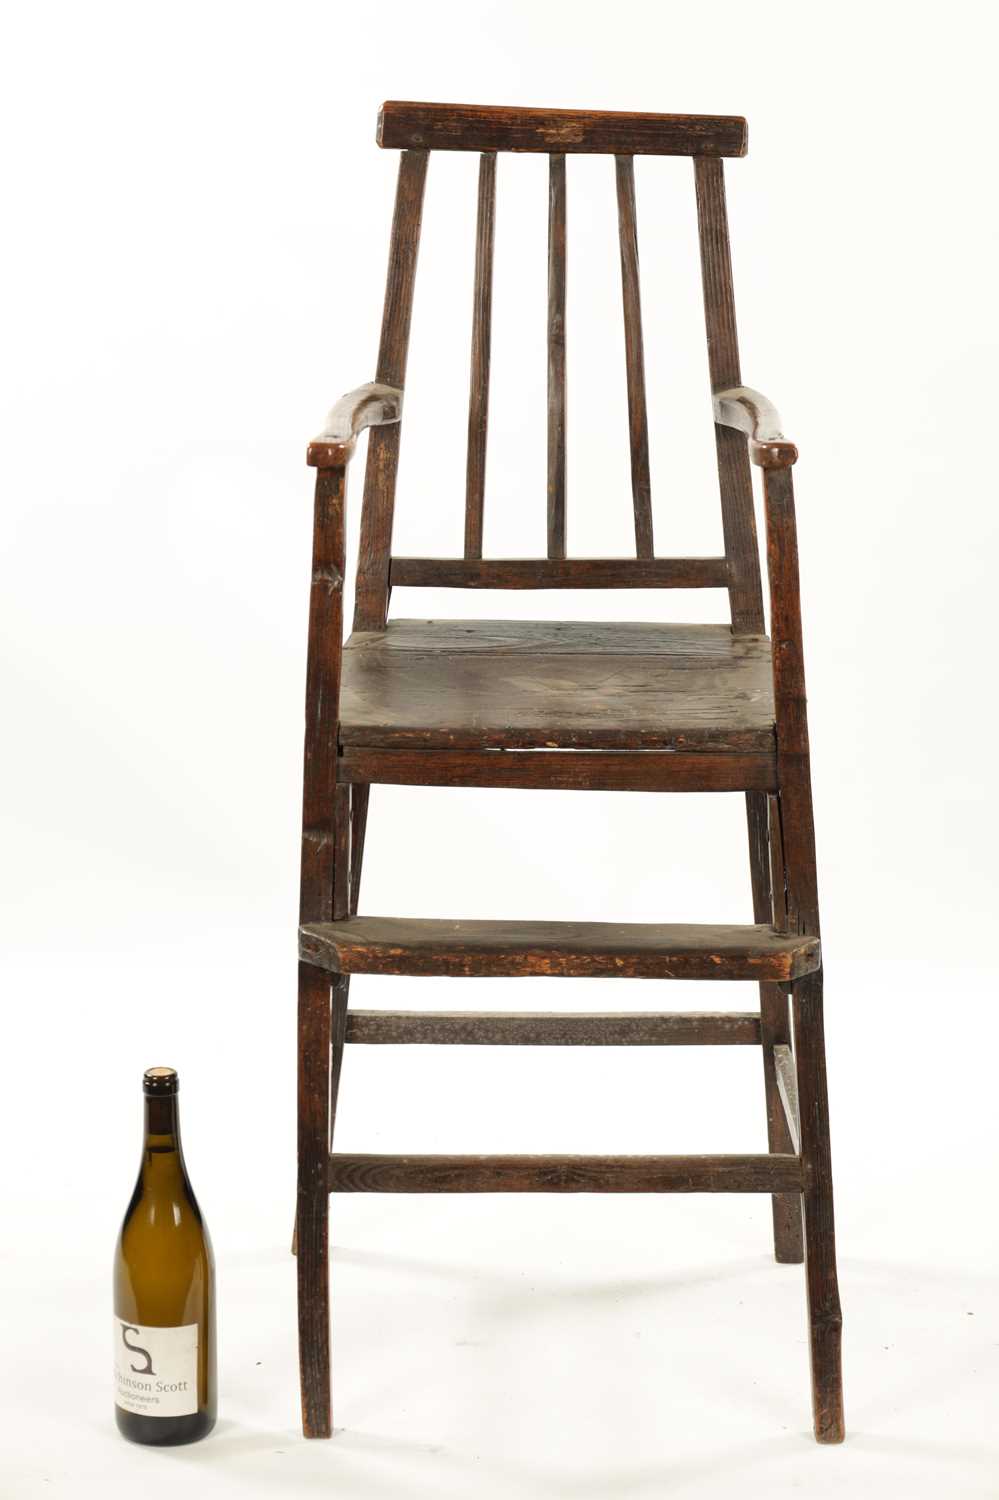 A PRIMITIVE 18TH CENTURY CHILDS FRUITWOOD SPLAT BACK HIGH CHAIR - Image 6 of 7